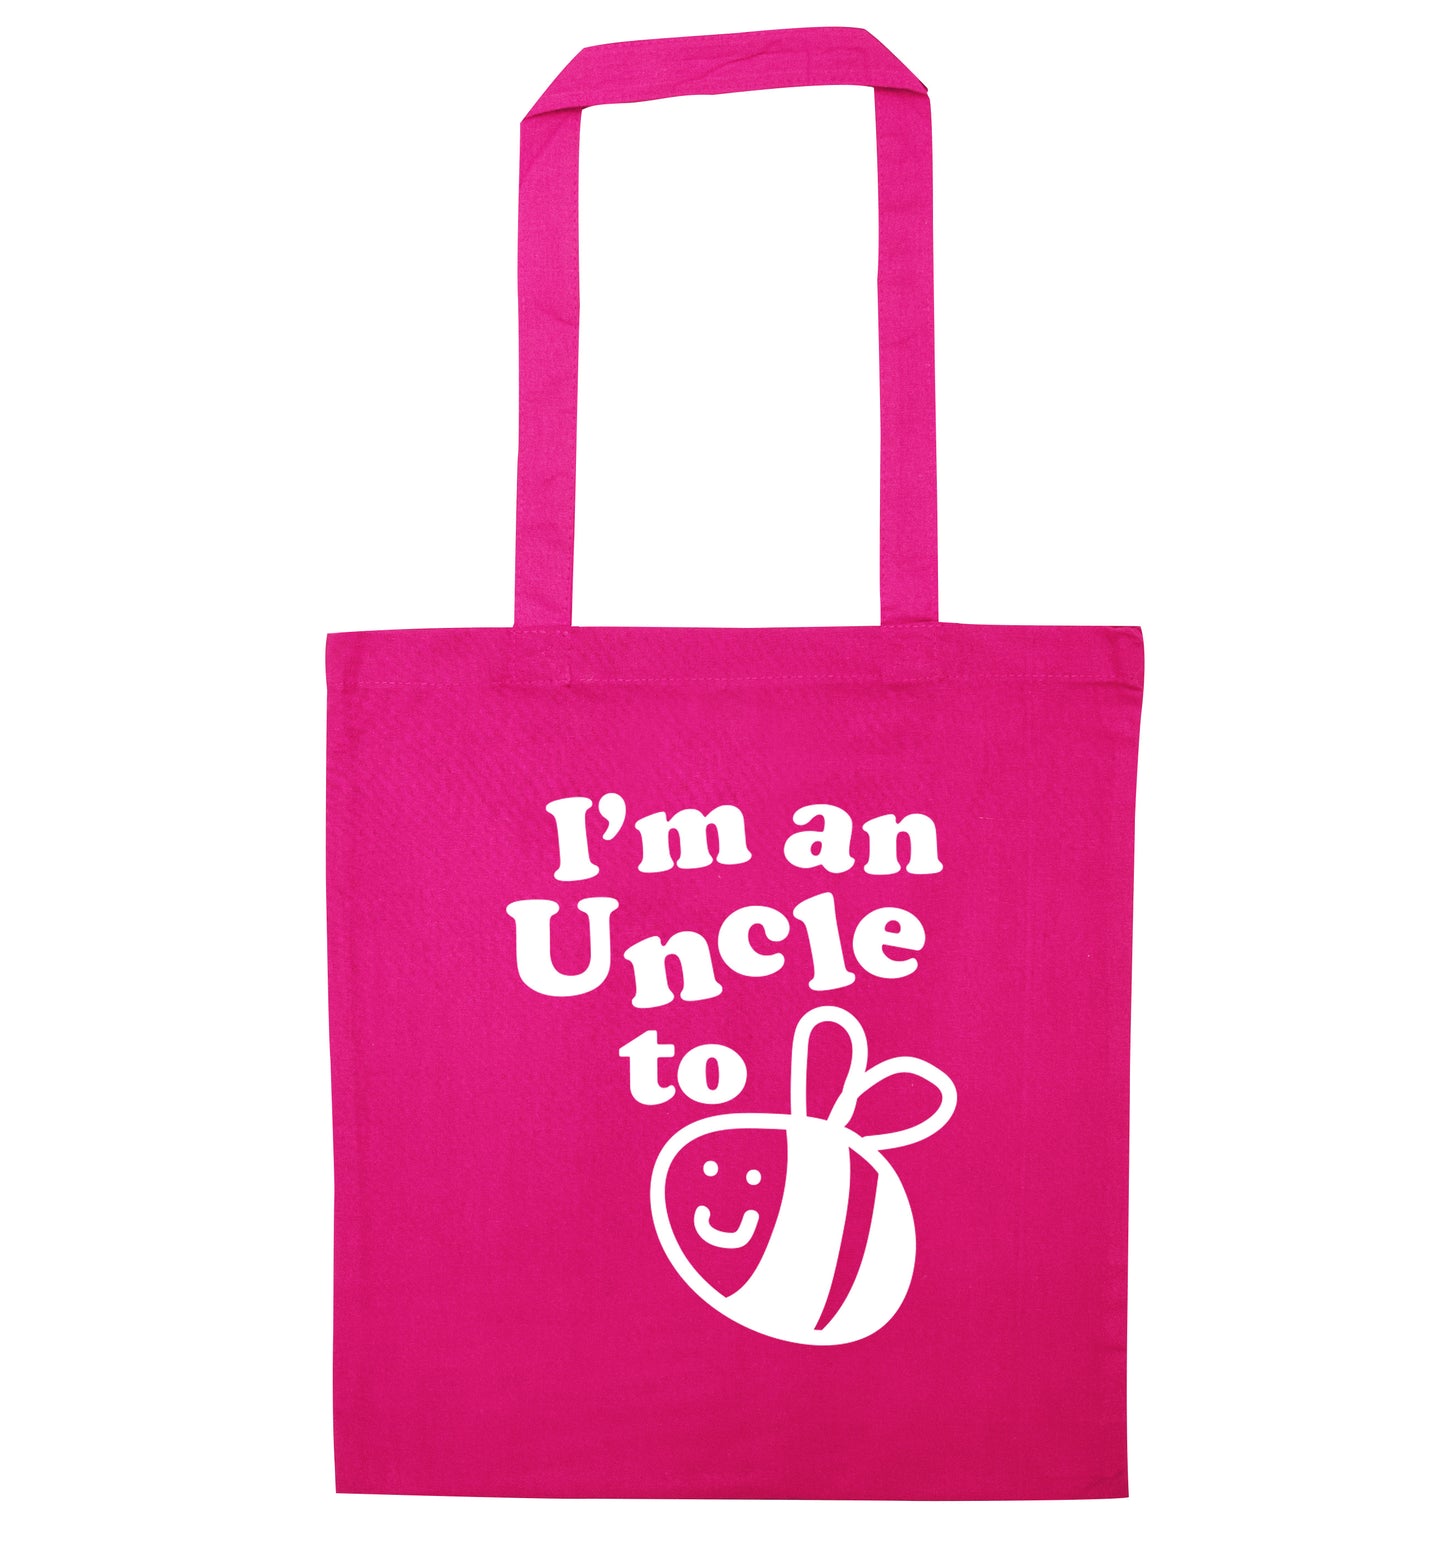 I'm an uncle to be pink tote bag